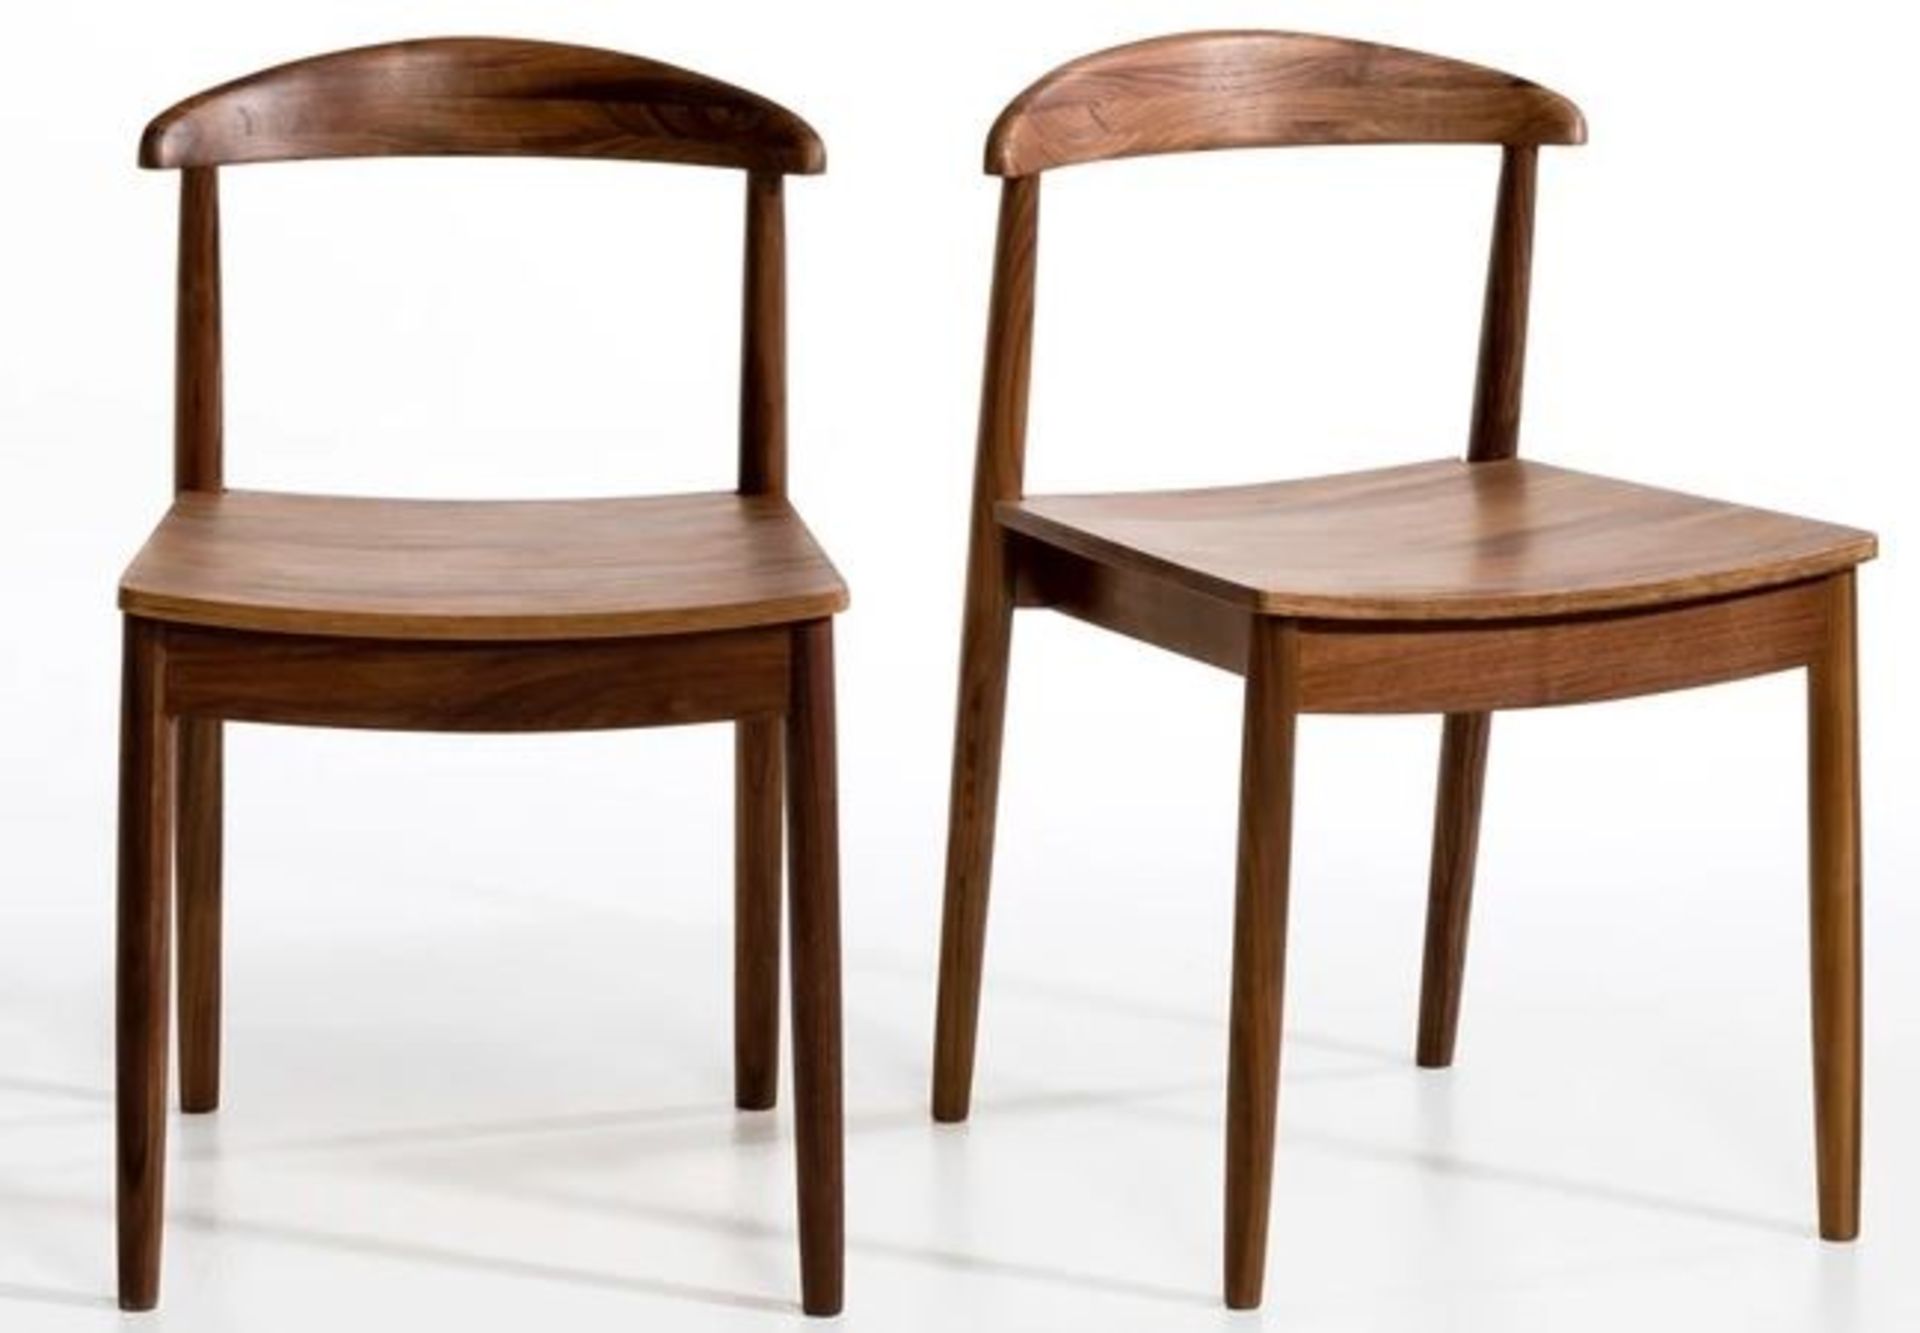 1 GRADE B BOXED DESIGNER SET OF 2 GALB WOODEN CHAIRS IN WALNUT / RRP £450.00 (PUBLIC VIEWING